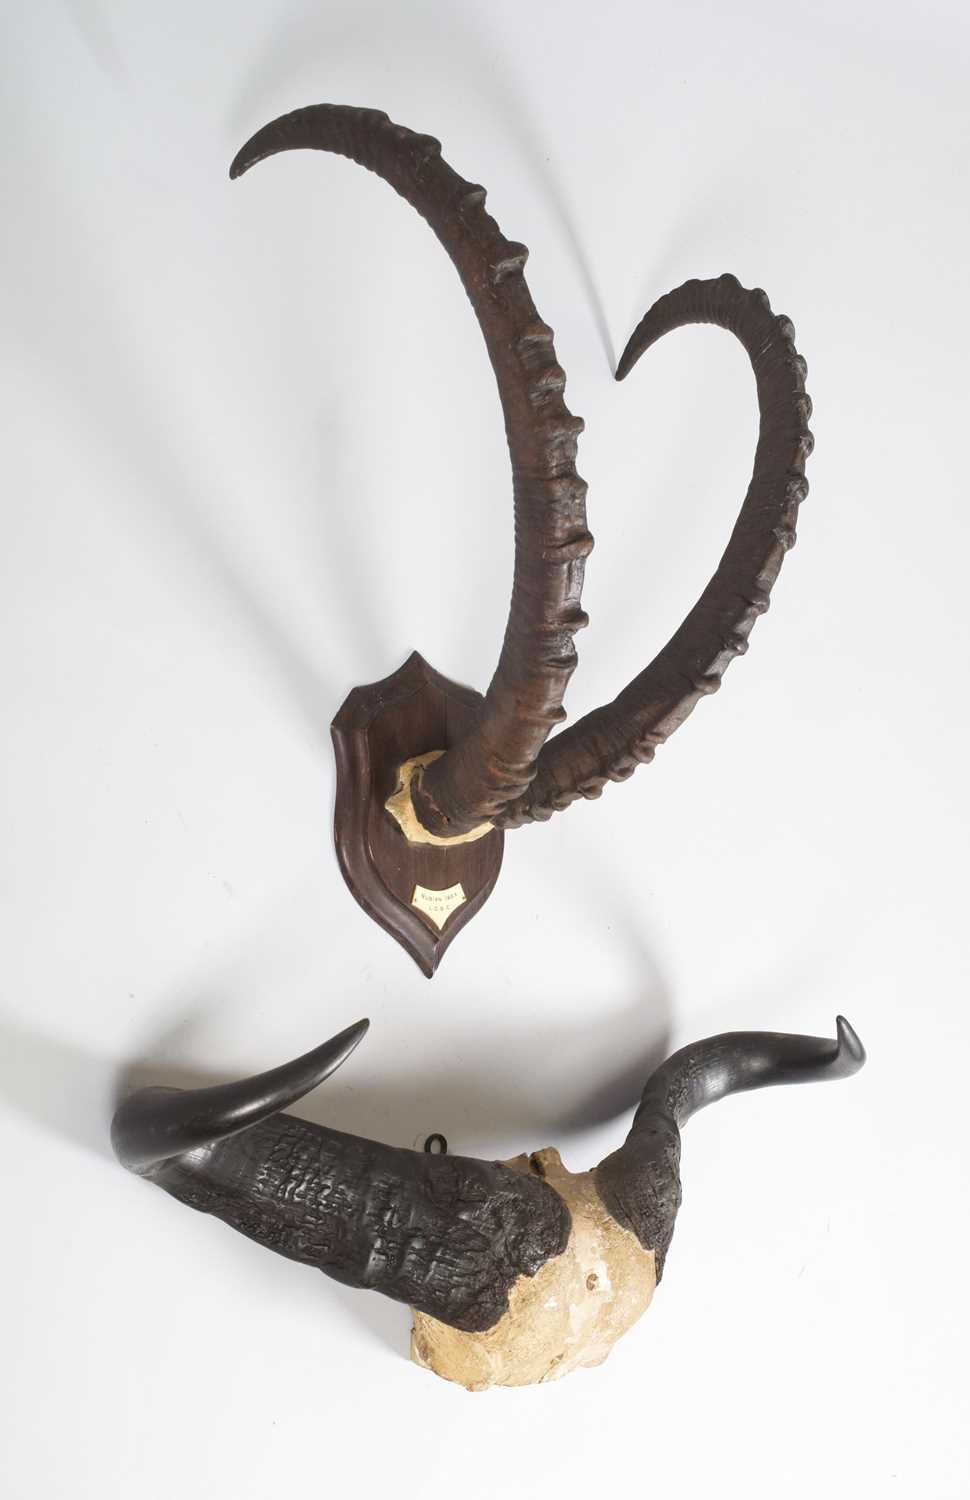 Antlers/Horns: A Set of Nubian Ibex Horns and Cape Buffalo Horns, circa 1900-1914, by Rowland Ward - Image 2 of 5